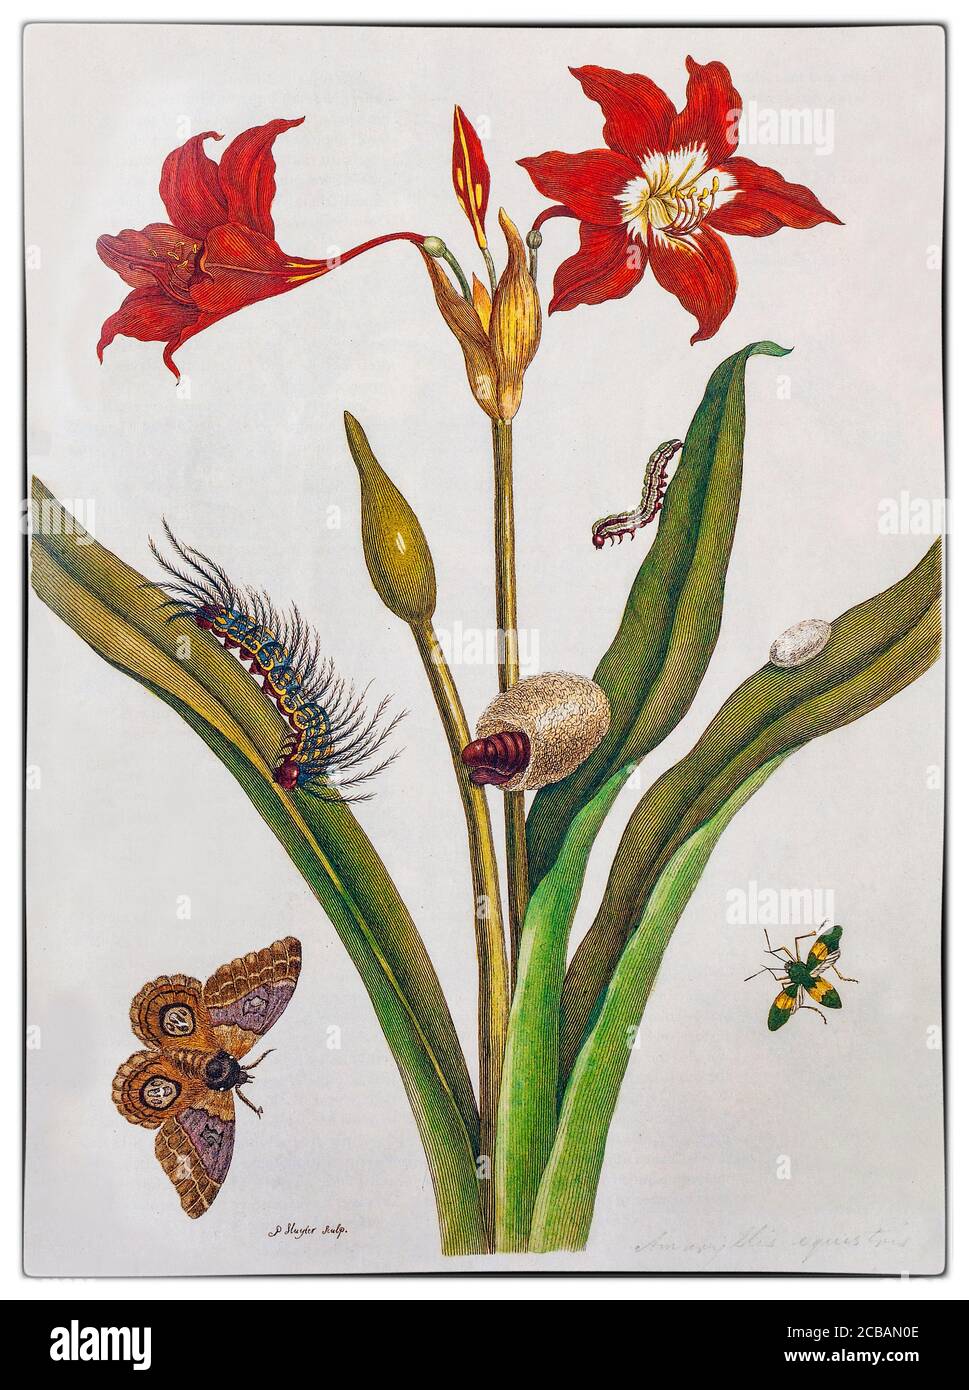 Maria Sibylla Merian (1647-1717) was a German-born naturalist and scientific illustrator, a descendant of the Frankfurt branch of the Swiss Merian family. Merian was one of the first European naturalists to observe insects directly. The illustration shows a page from the artist's first major work, 'Der Raupen wunderbare Verwandelung und sonderbare Blumennahrung' (Trans: The caterpillars' wonderful transformation and strange flower food) Stock Photo